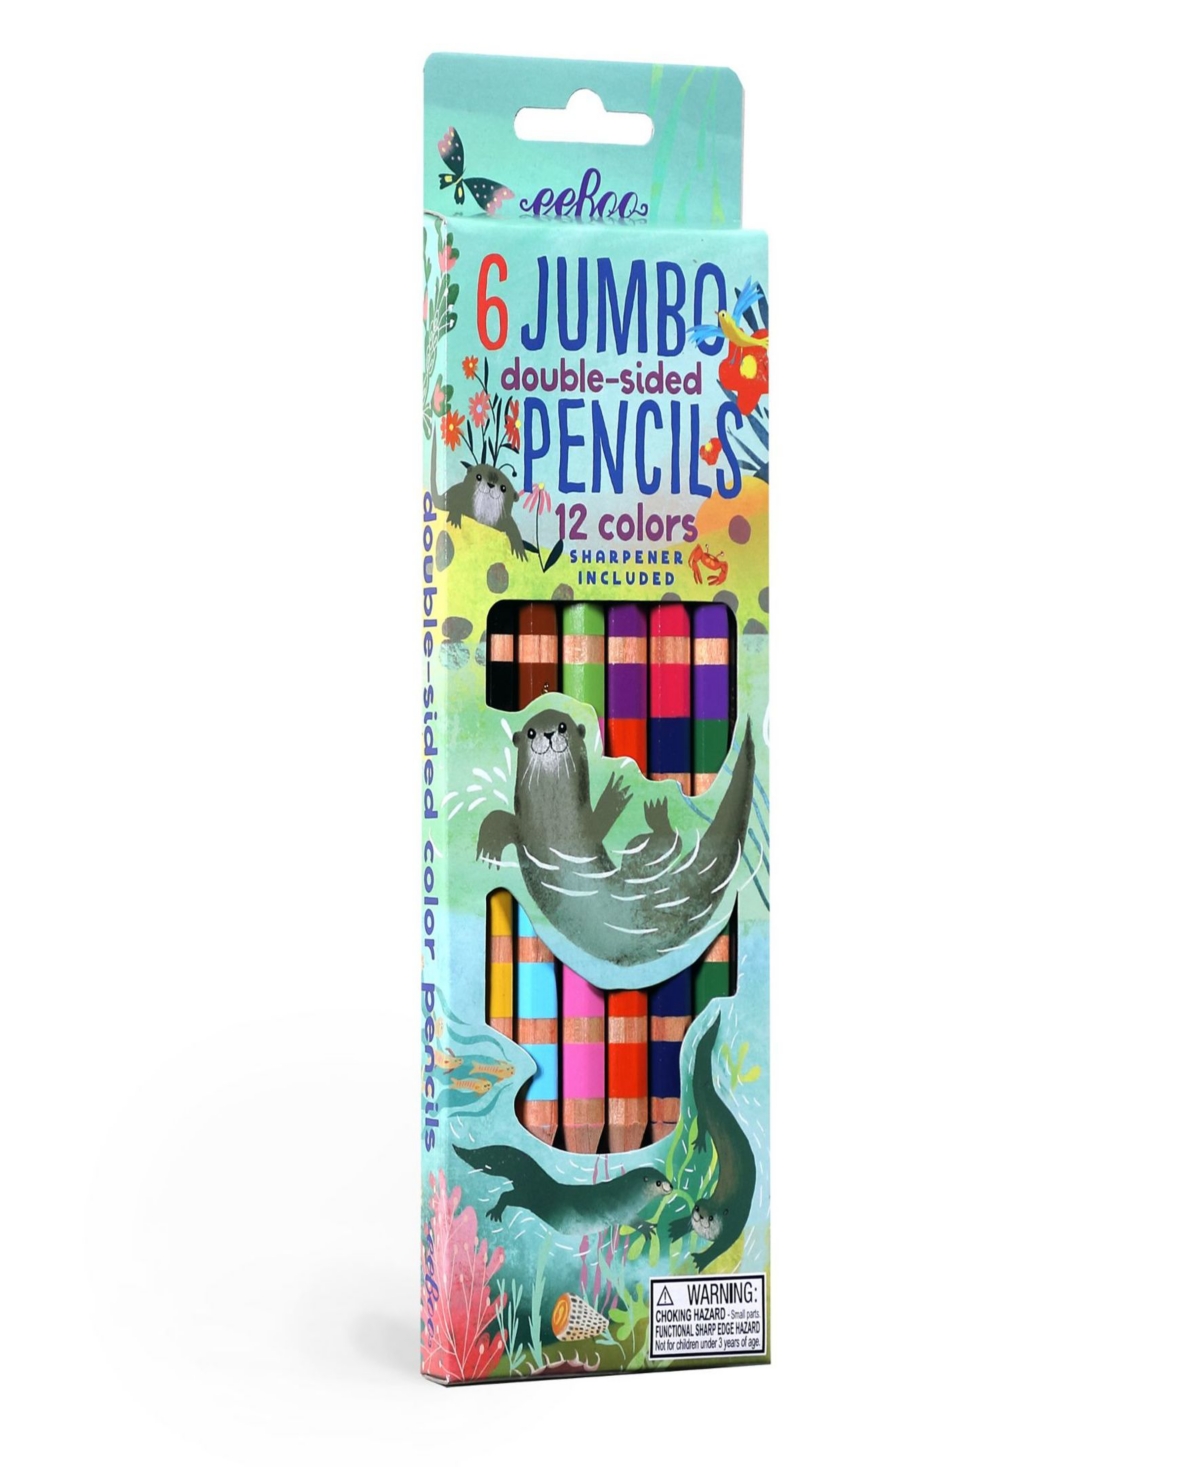 Otters at Play Jumbo Double-Sided Color Pencils, Set of 7 - Multi